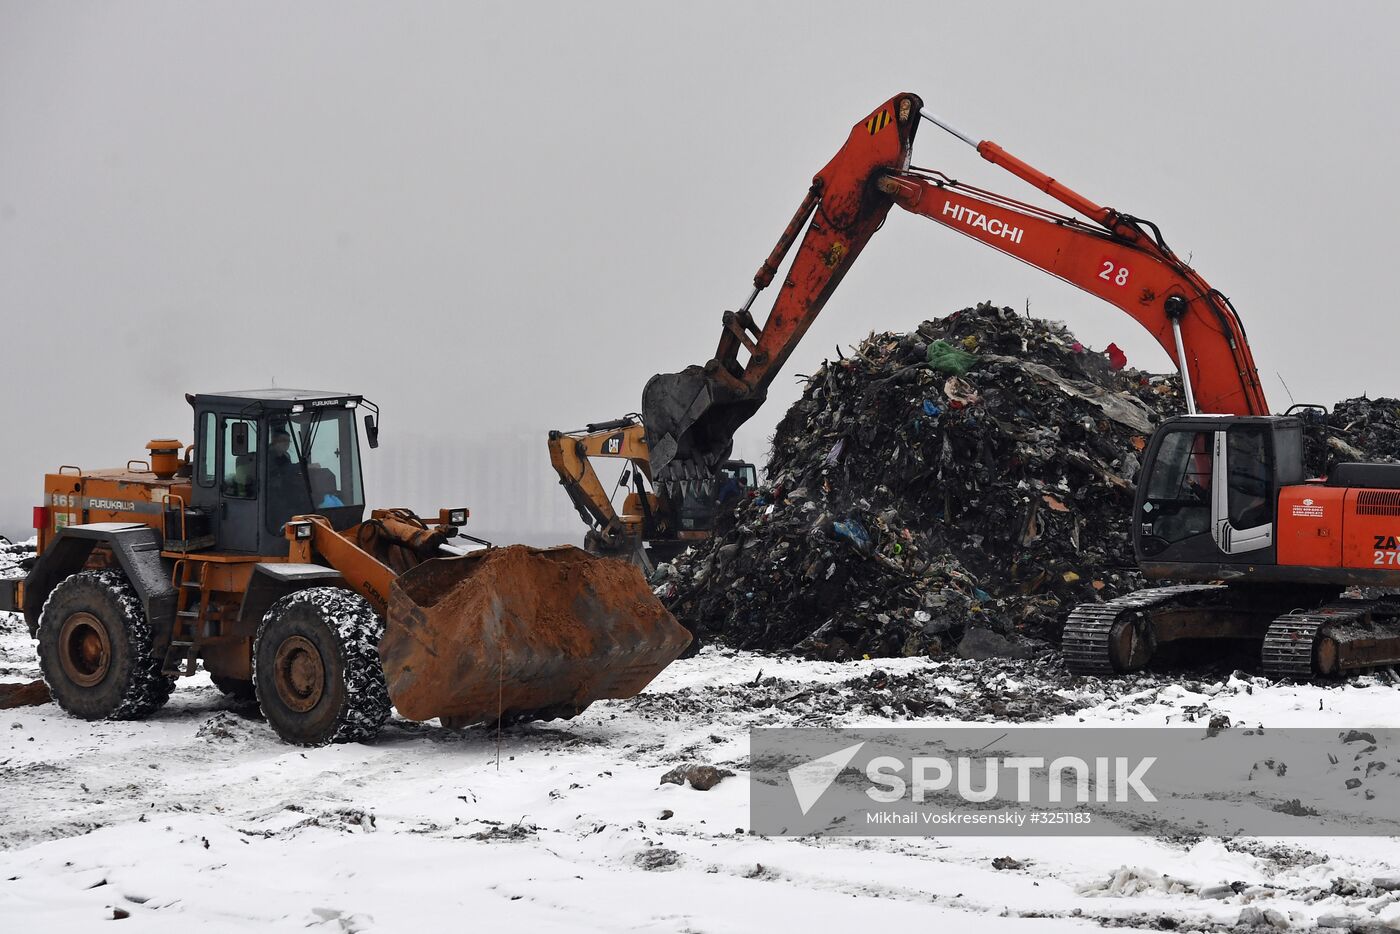 Kuchino landfill site to include flare facility for waste recycling